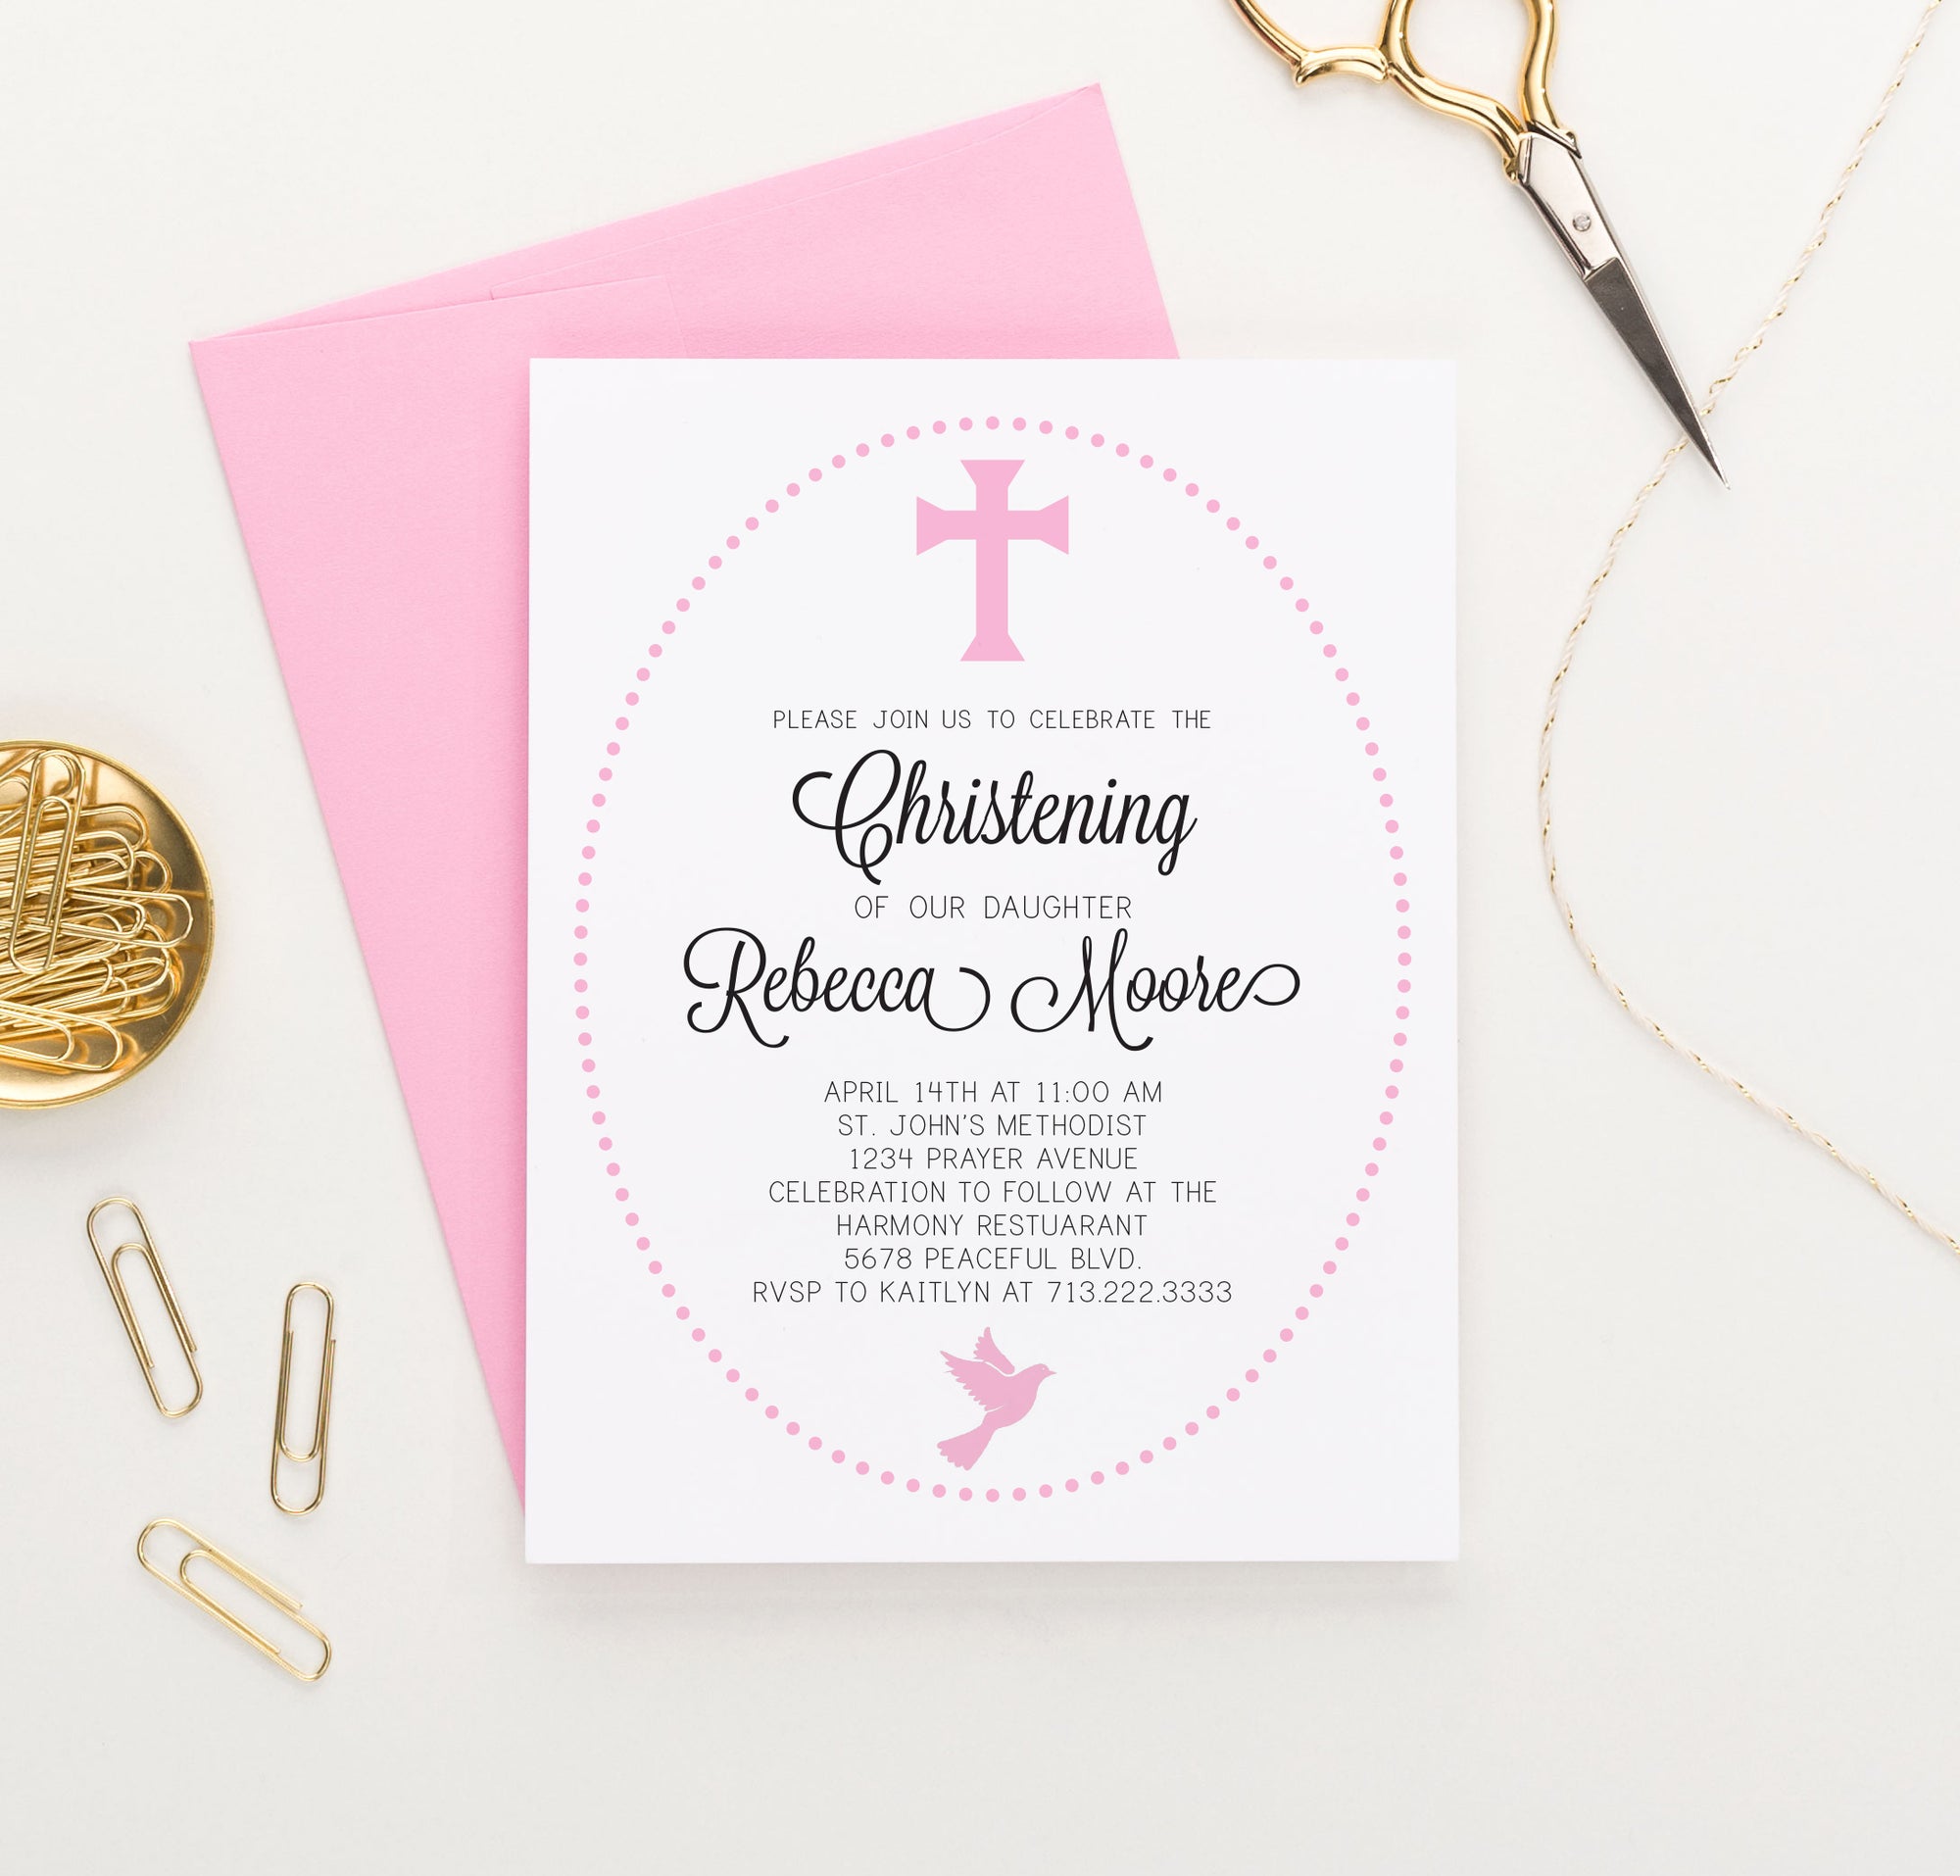 Personalized Pink Christening Invitations With Polkadot Frame